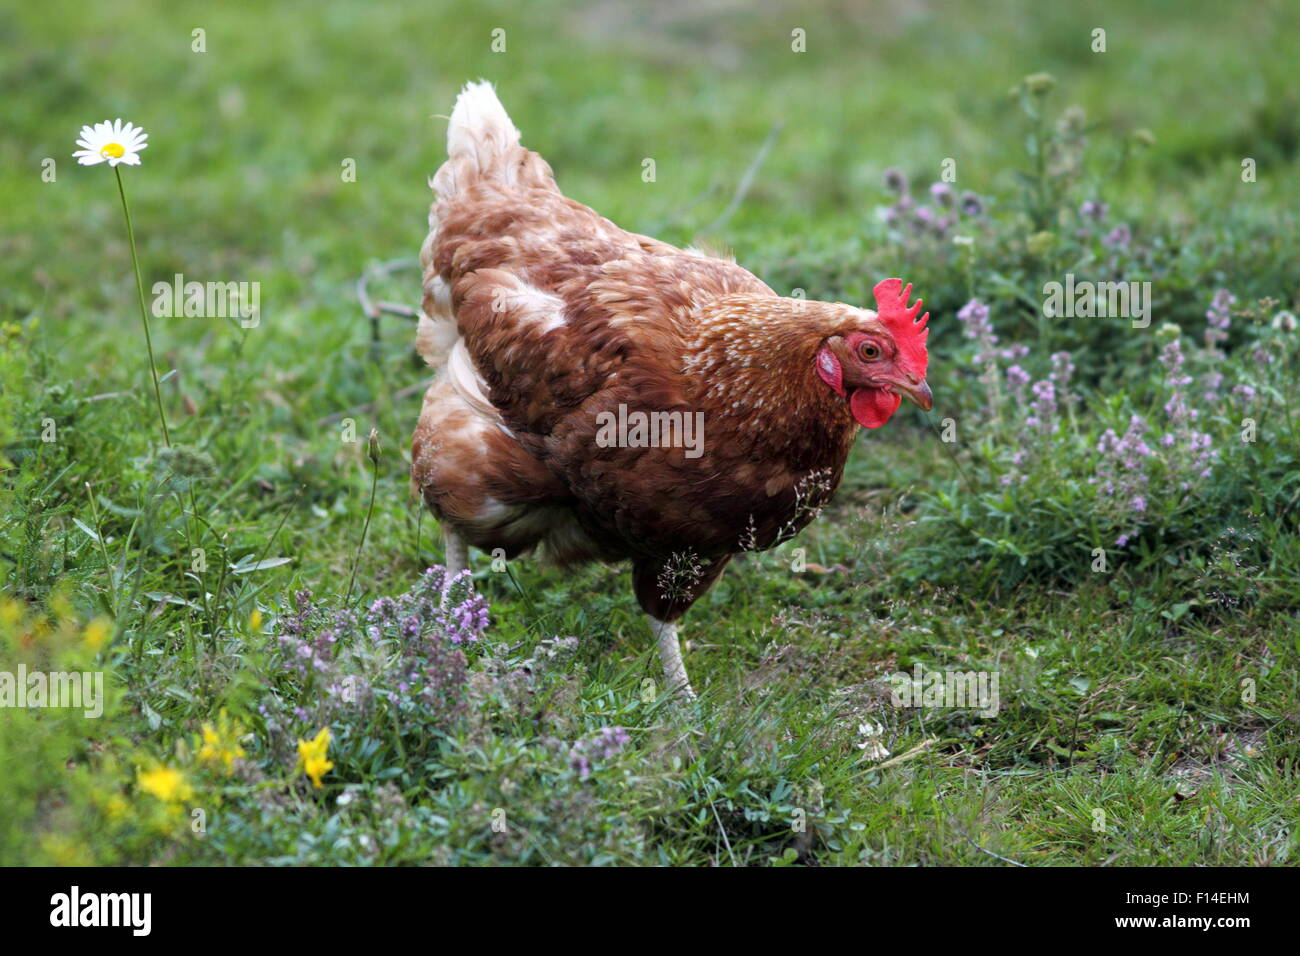 egg-laying hen on a natural meadow full of wild flowers Stock Photo